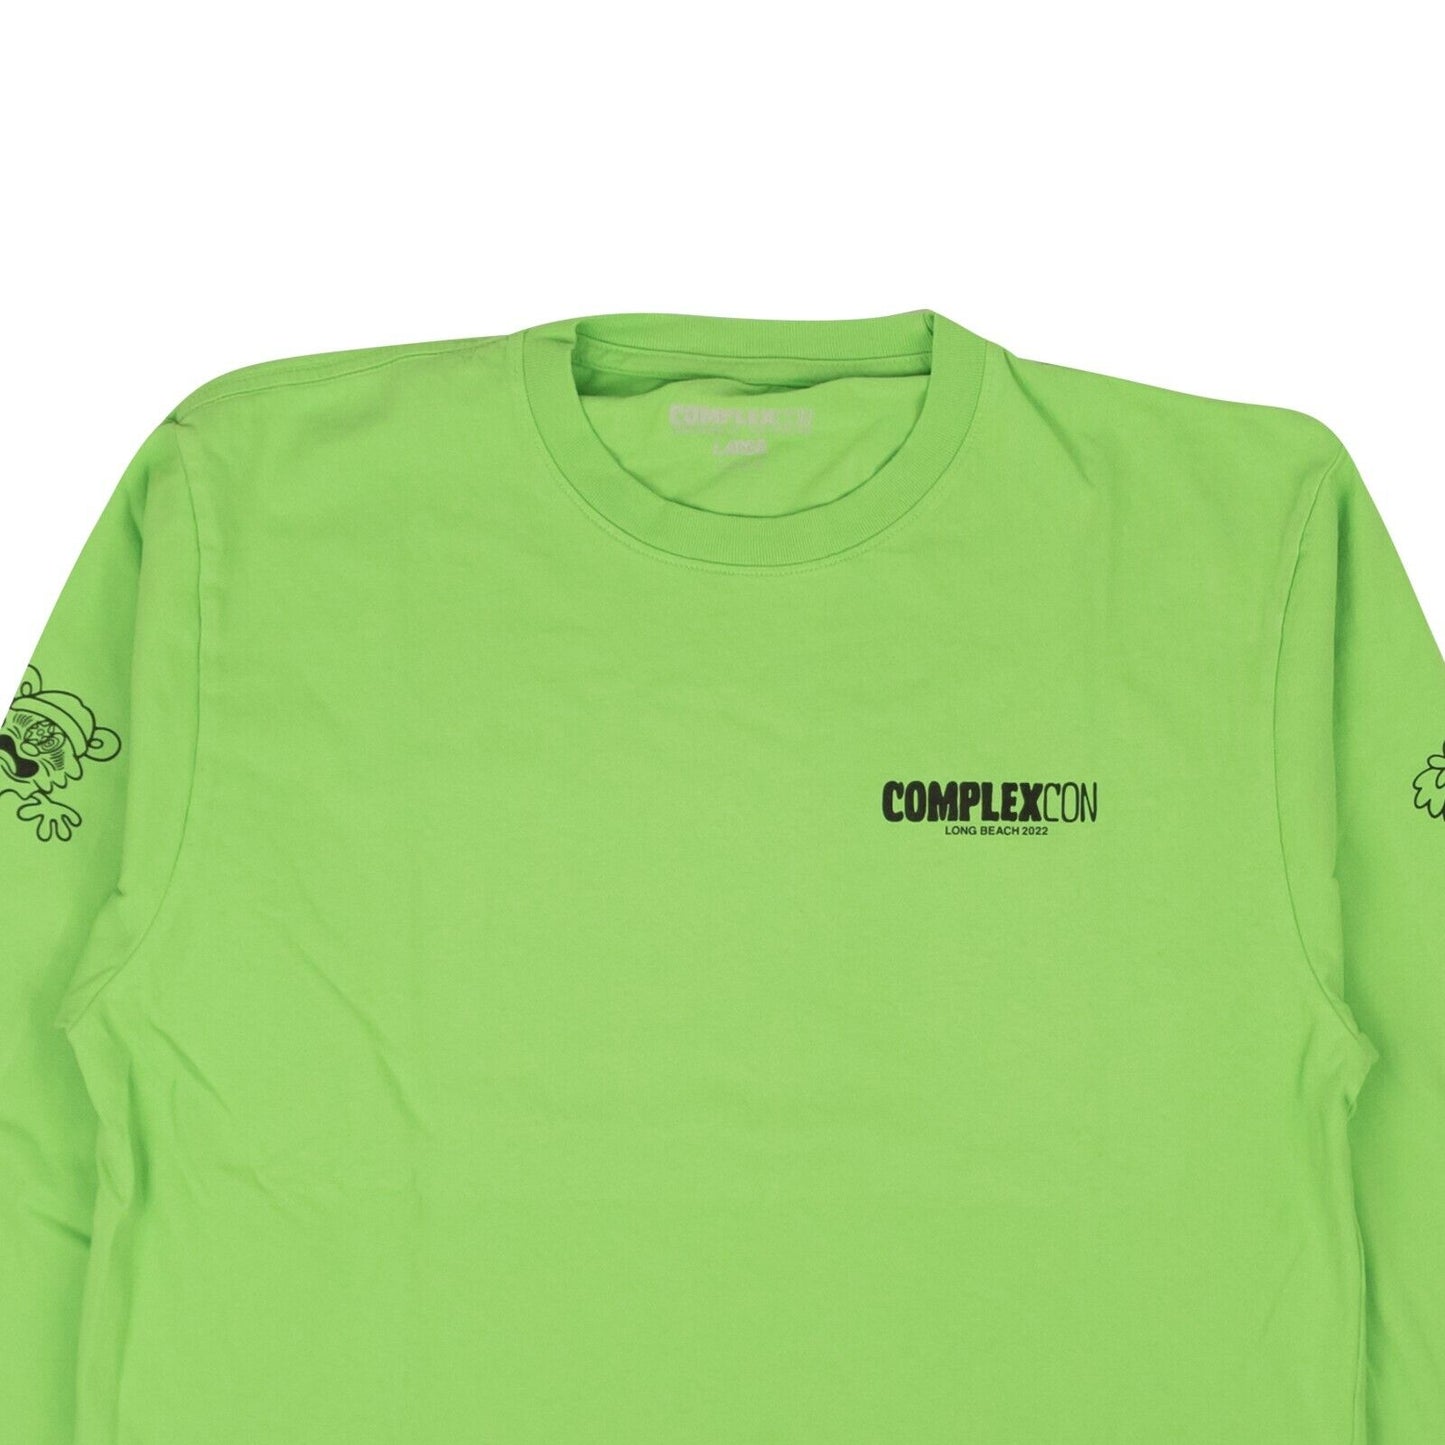 Complexcon X Verdy Ls Tee - Green